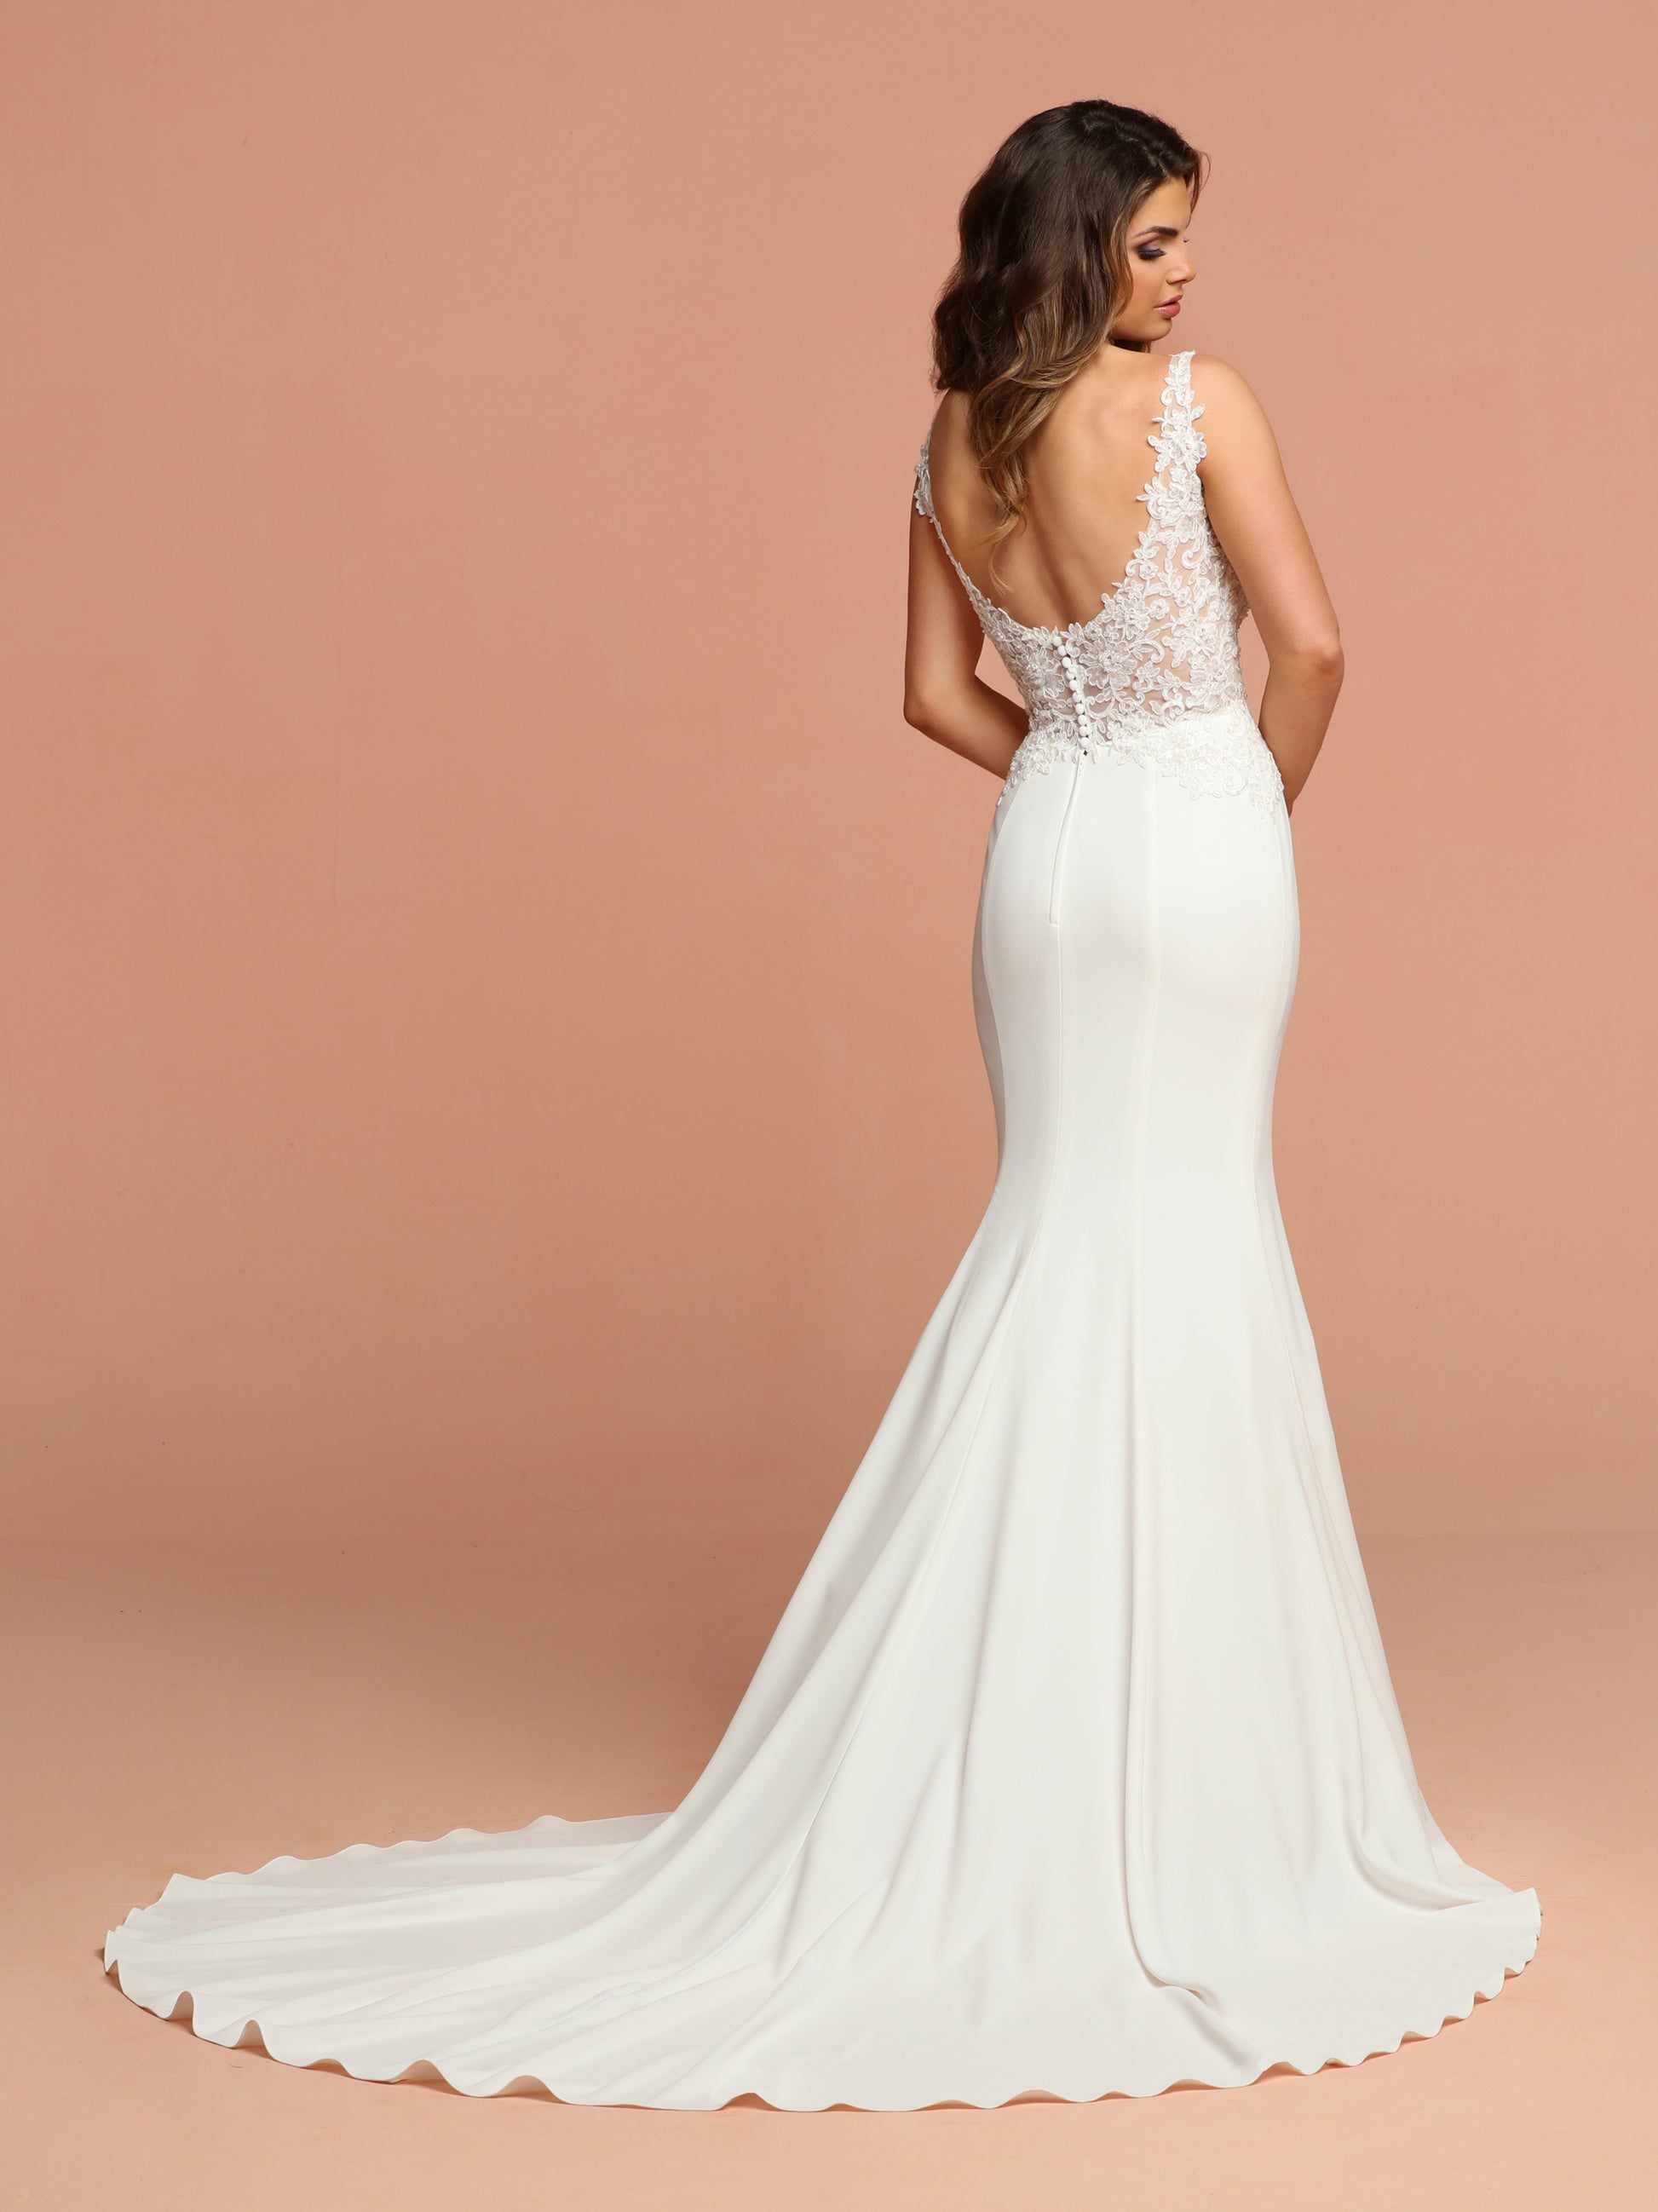 Davinci Bridal 50592 is a long Fitted Crepe & Lace Mermaid Wedding Dress. Featuring a Sheer tulle & Lace bodice with a V neck and open back. The Fit & Flare skirt is crepe with a full bottom and stunning train.   Available for 1-2 Week Delivery!!!  Available Sizes: 2,4,6,8,10,12,14,16,18,20  Available Colors: Ivory/Nude, Ivory/Ivory